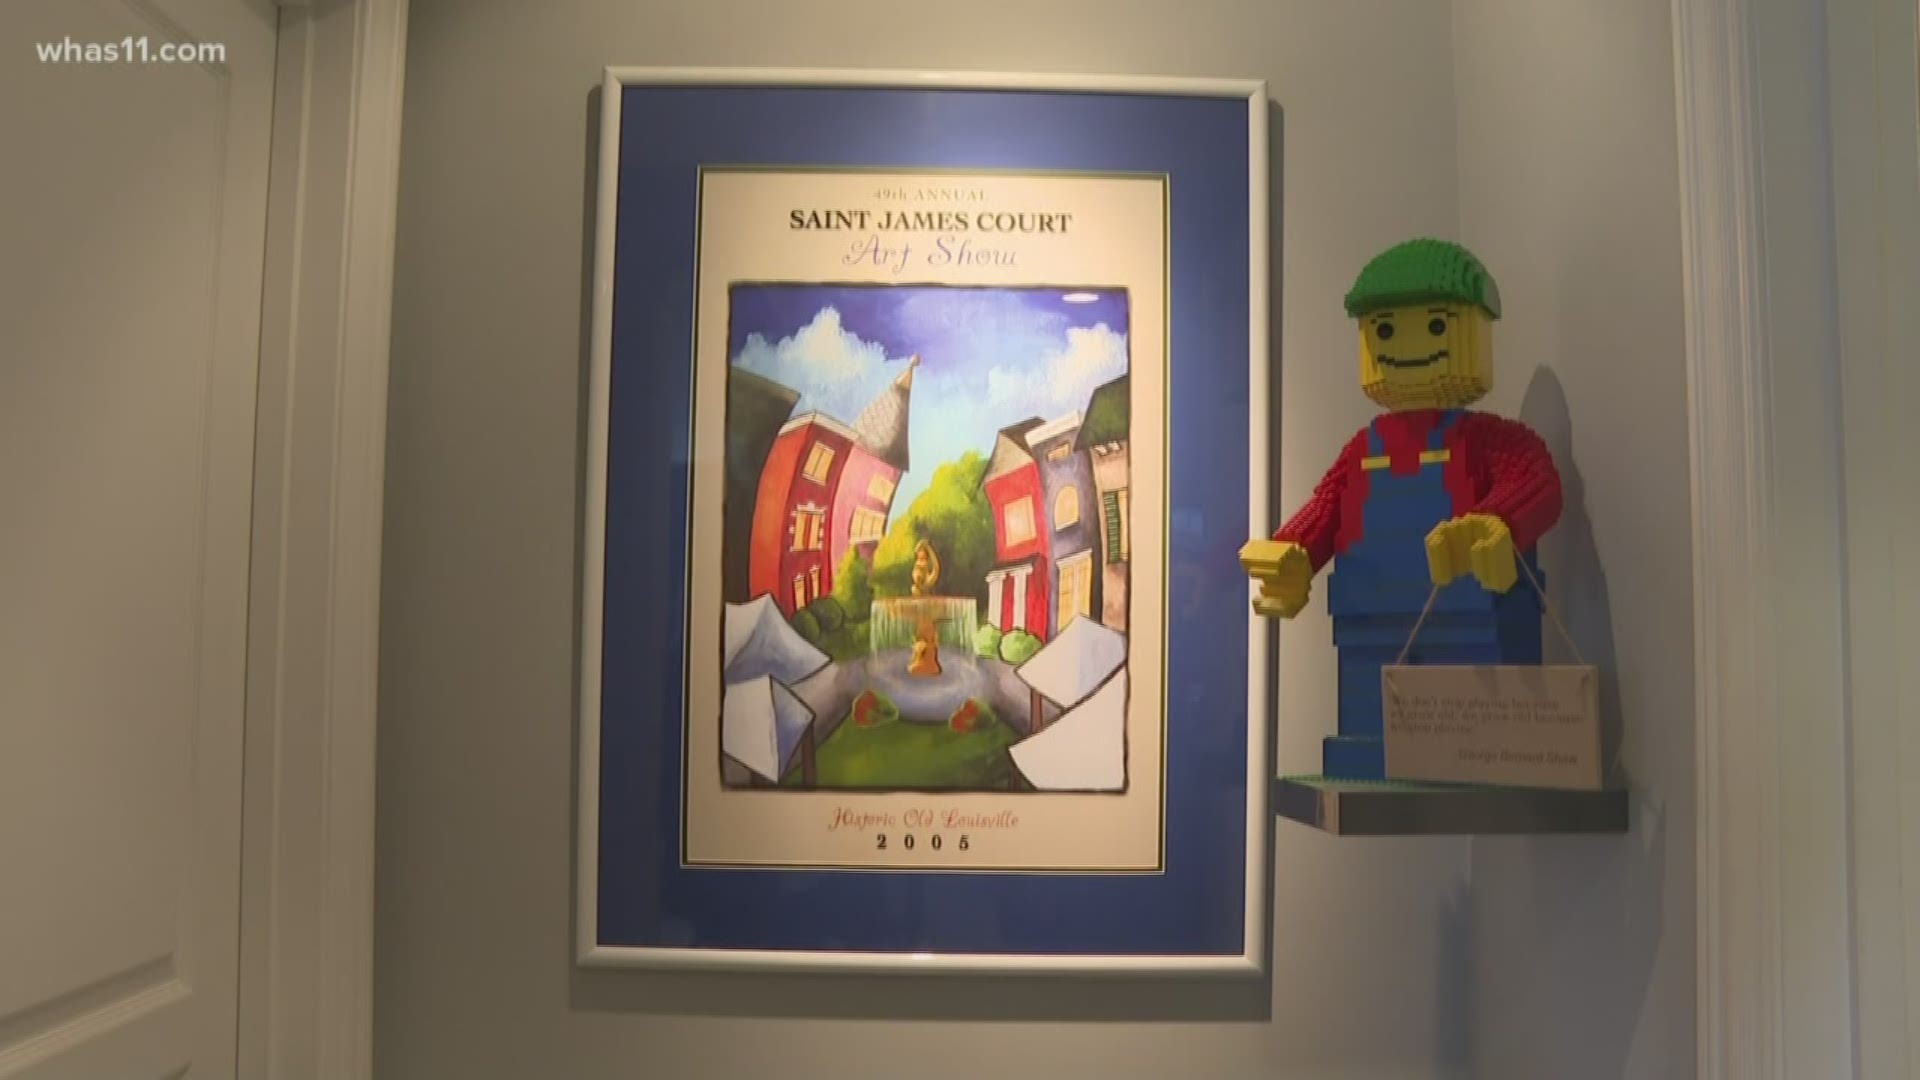 A Louisville man shares his joy of building with LEGO's while passing down his legacy to his kids.